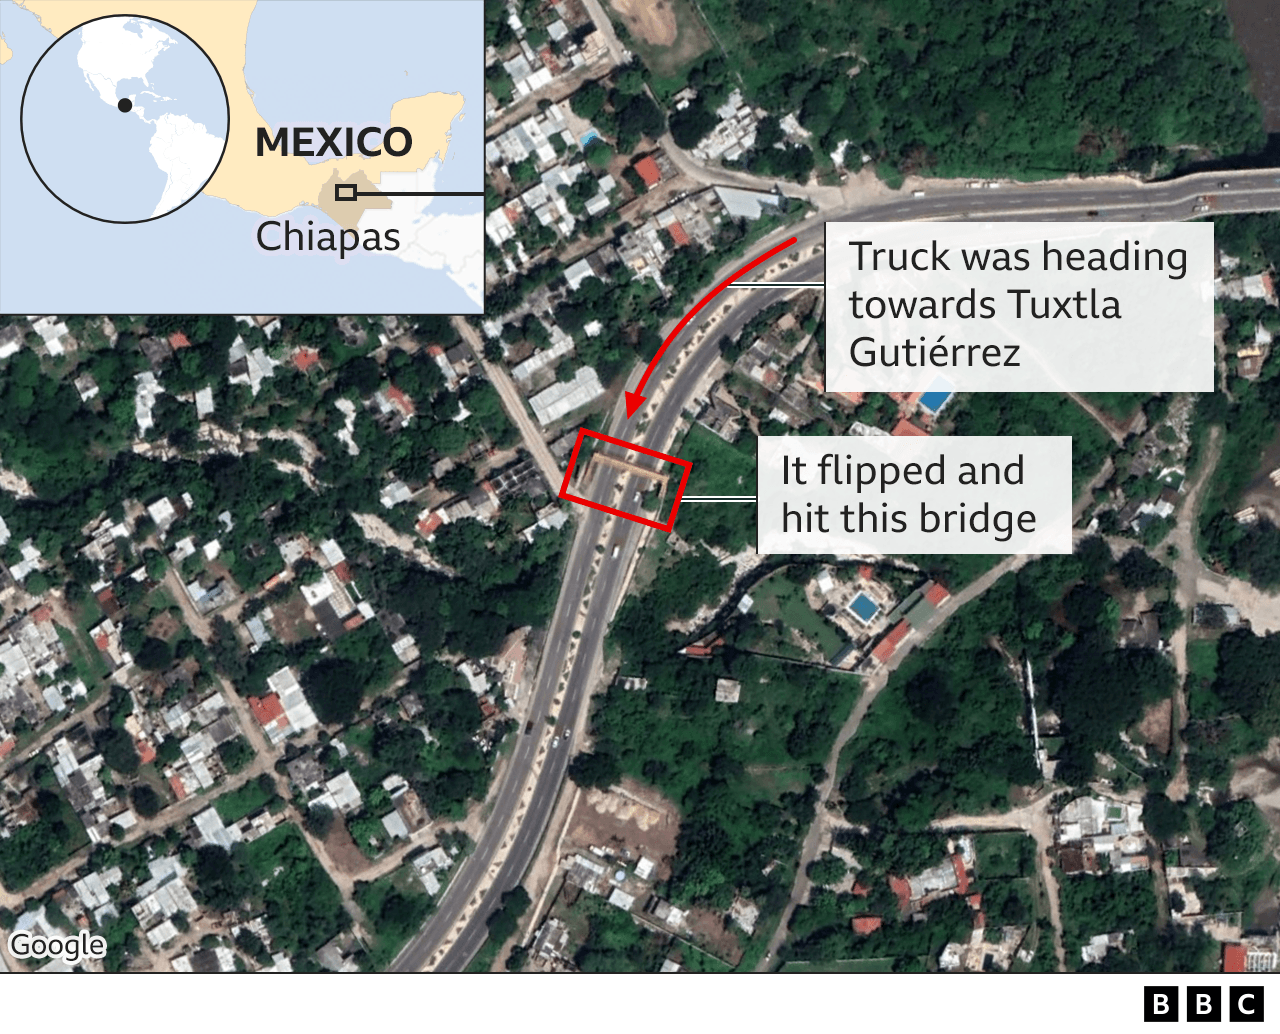 Satellite image showing the site where the truck crashed